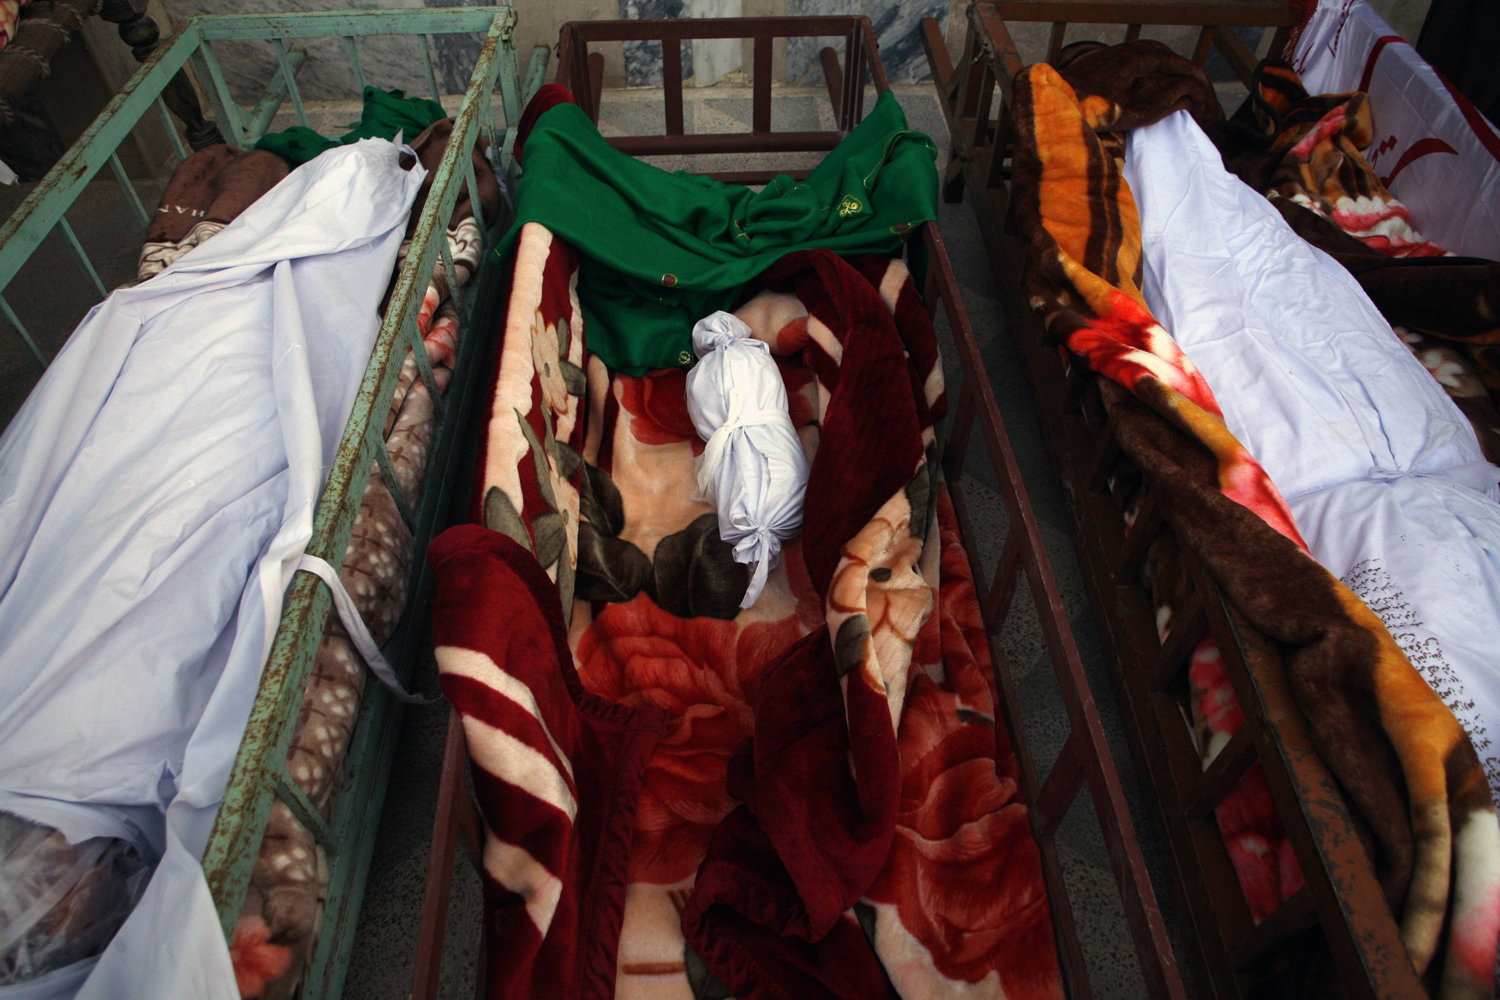 The body of a baby who was killed in Saturday's bomb attack in a Shi'ite Muslim area, lies in a coffin at a mosque during a funeral ceremony in the Pakistani city of Quetta